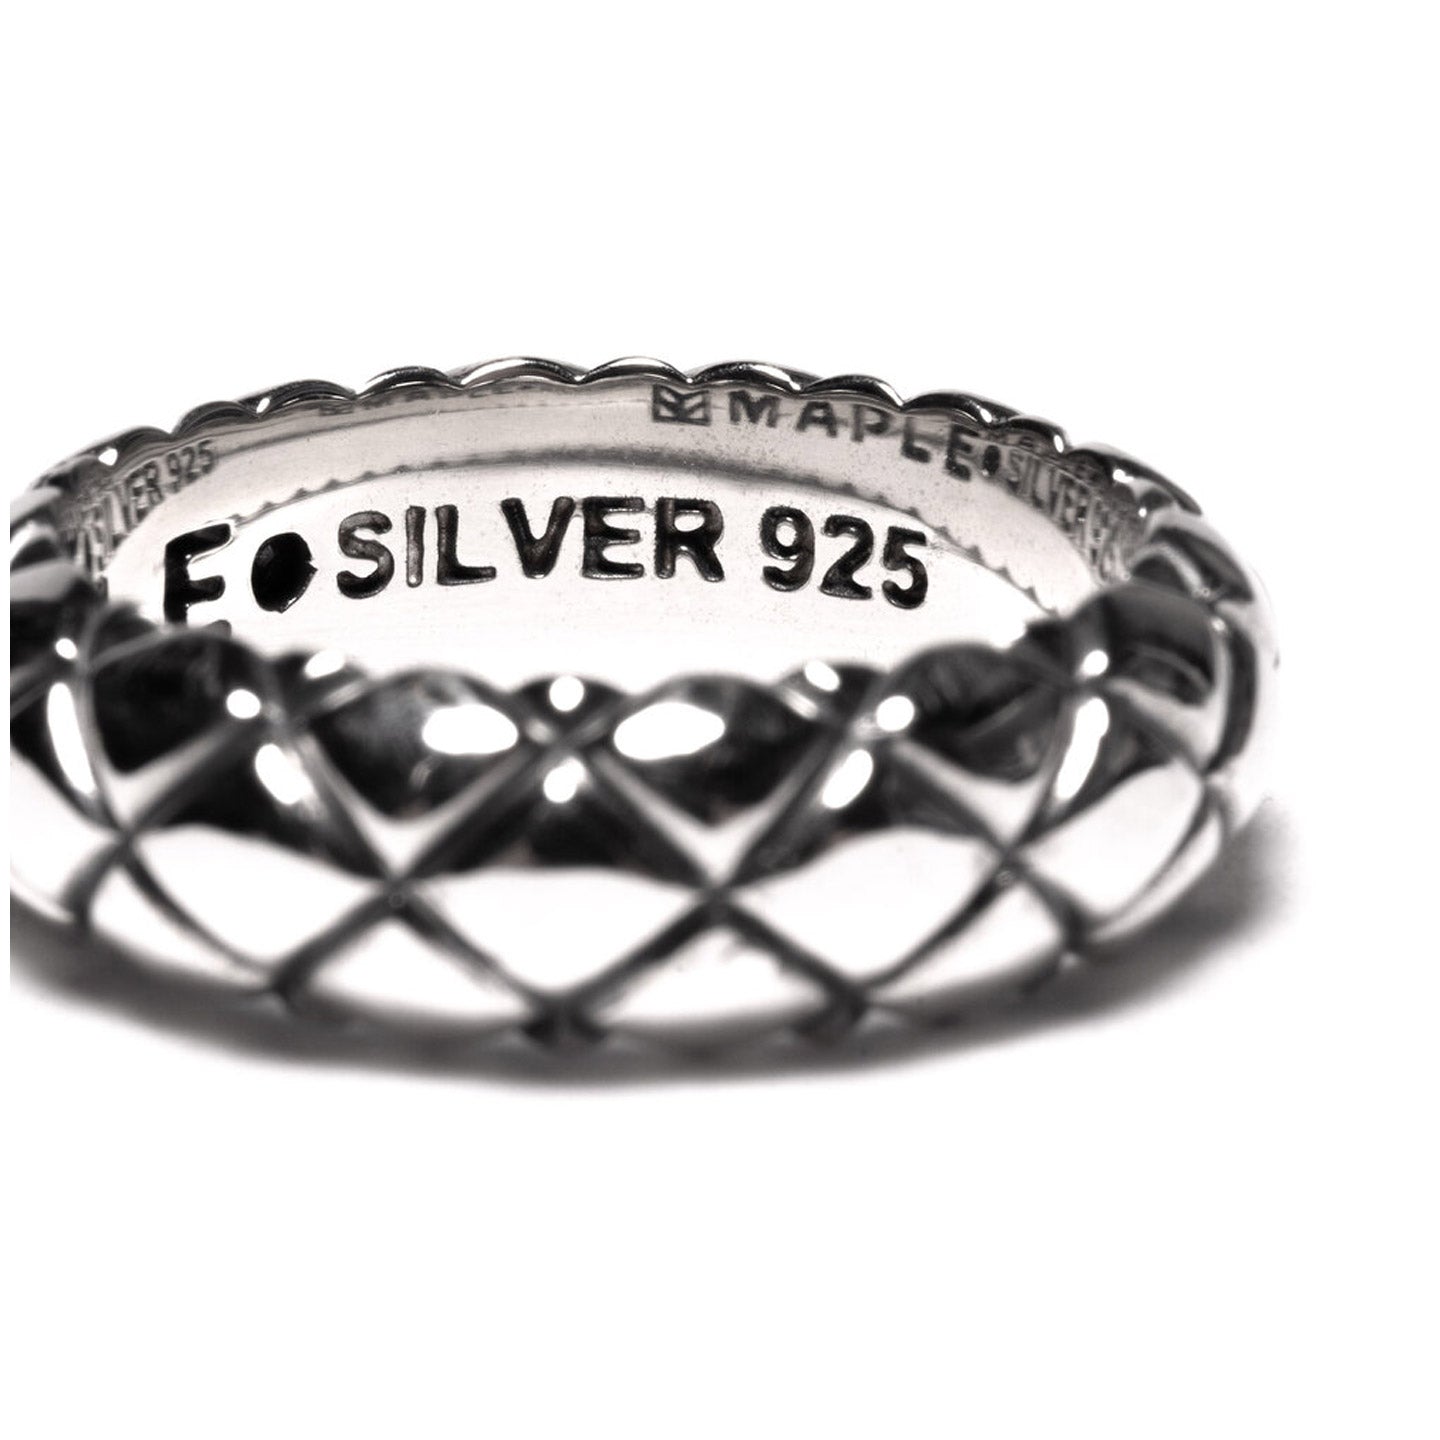 MAPLE QUILTED BAND RING SILVER 925